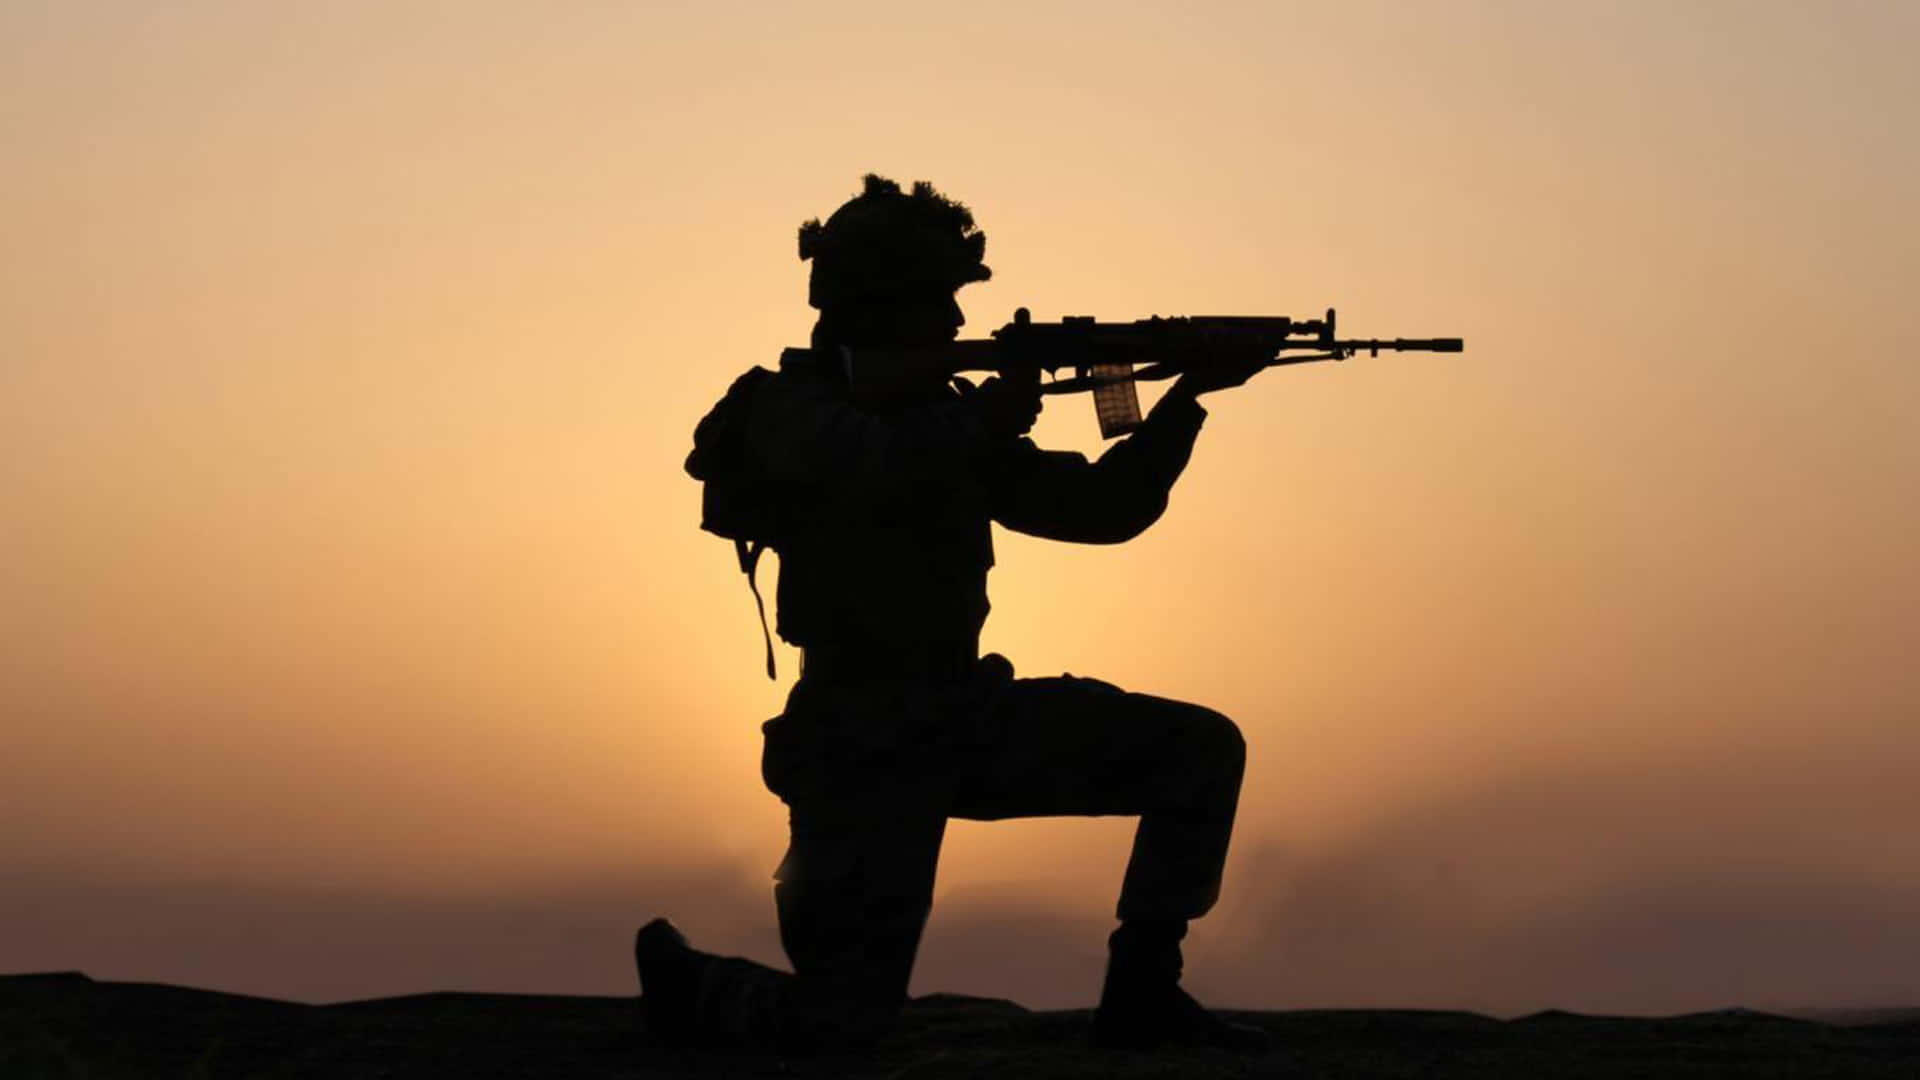 A Soldier Is Silhouetted At Sunset